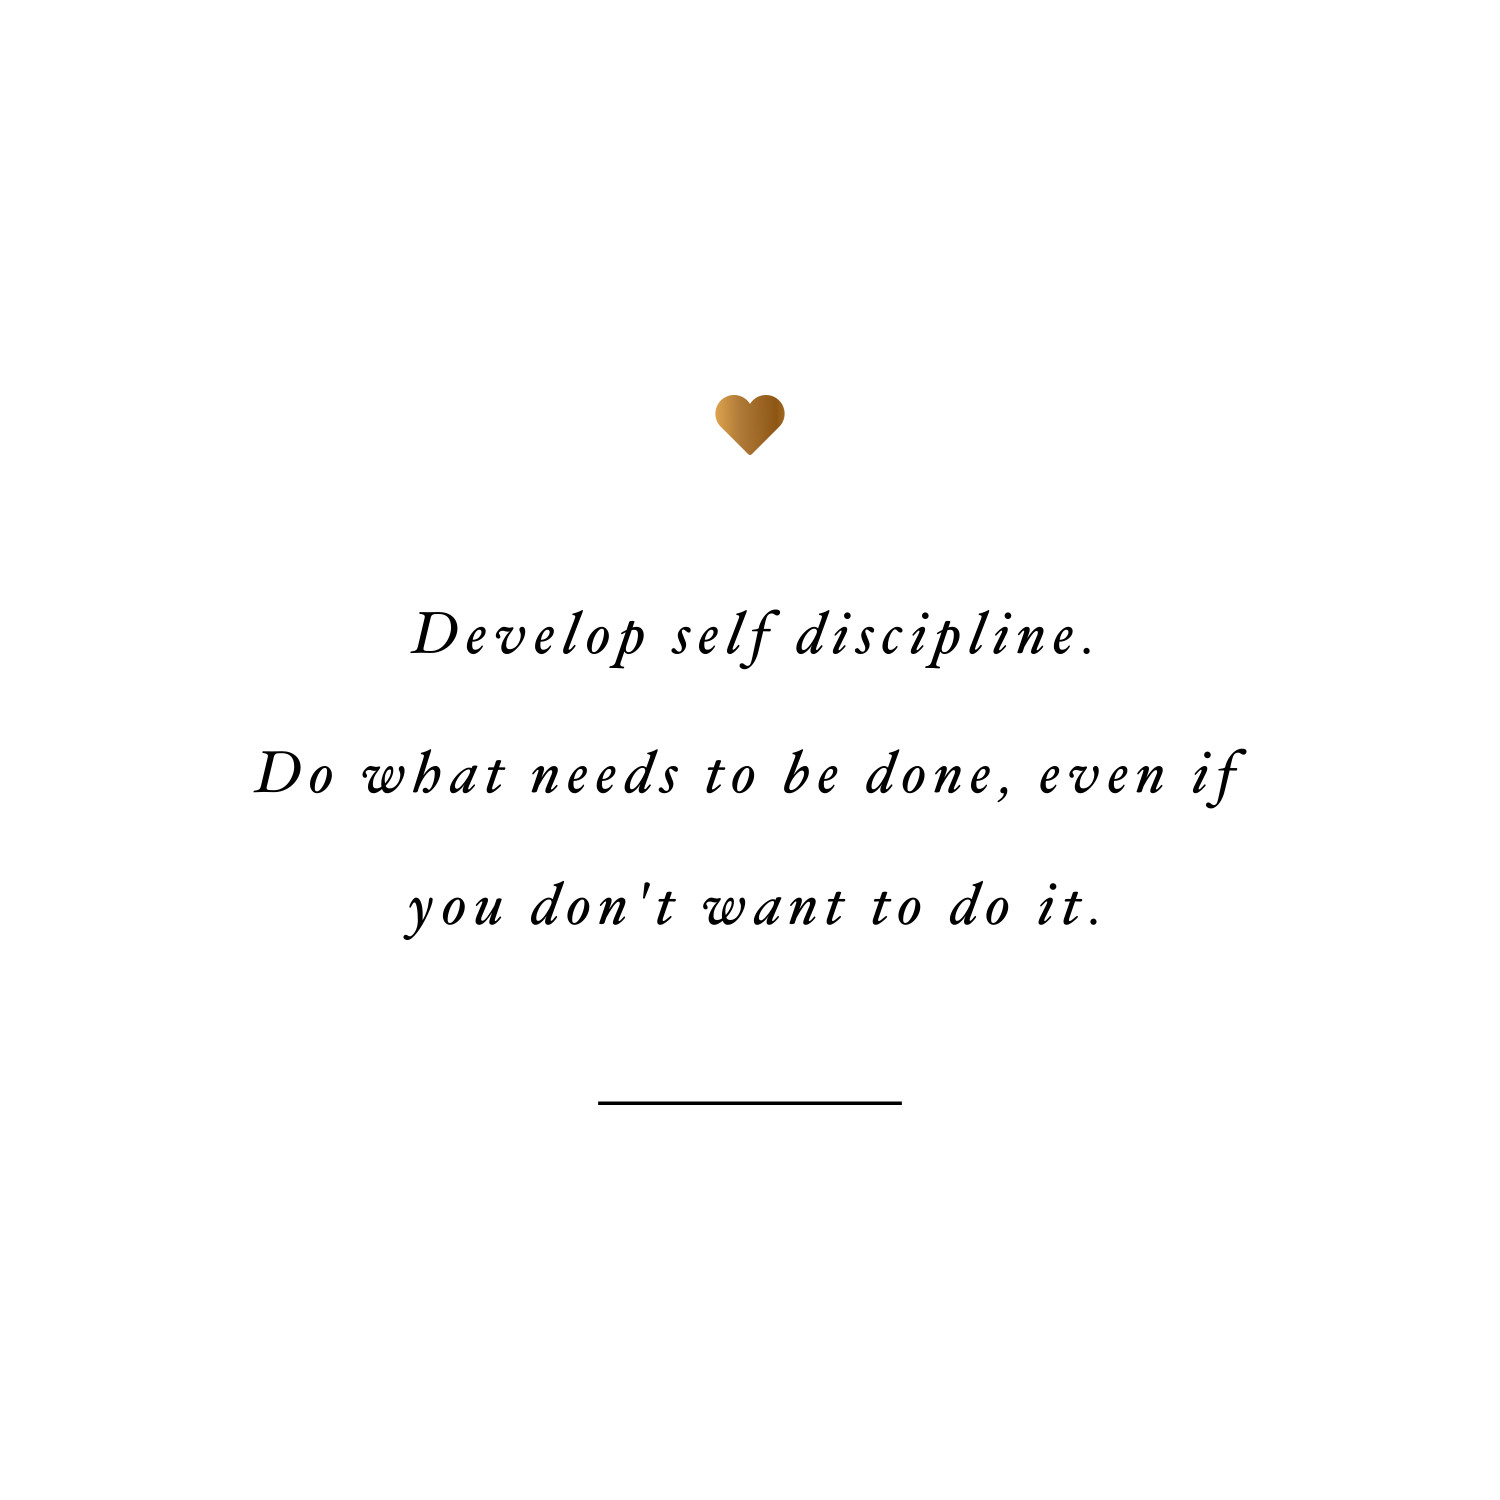 Develop self discipline! Browse our collection of health and fitness inspirational quotes and get instant training motivation. Transform positive thoughts into positive actions and get fit, healthy and happy! https://www.spotebi.com/workout-motivation/develop-self-discipline-health-and-fitness-inspirational-quote/